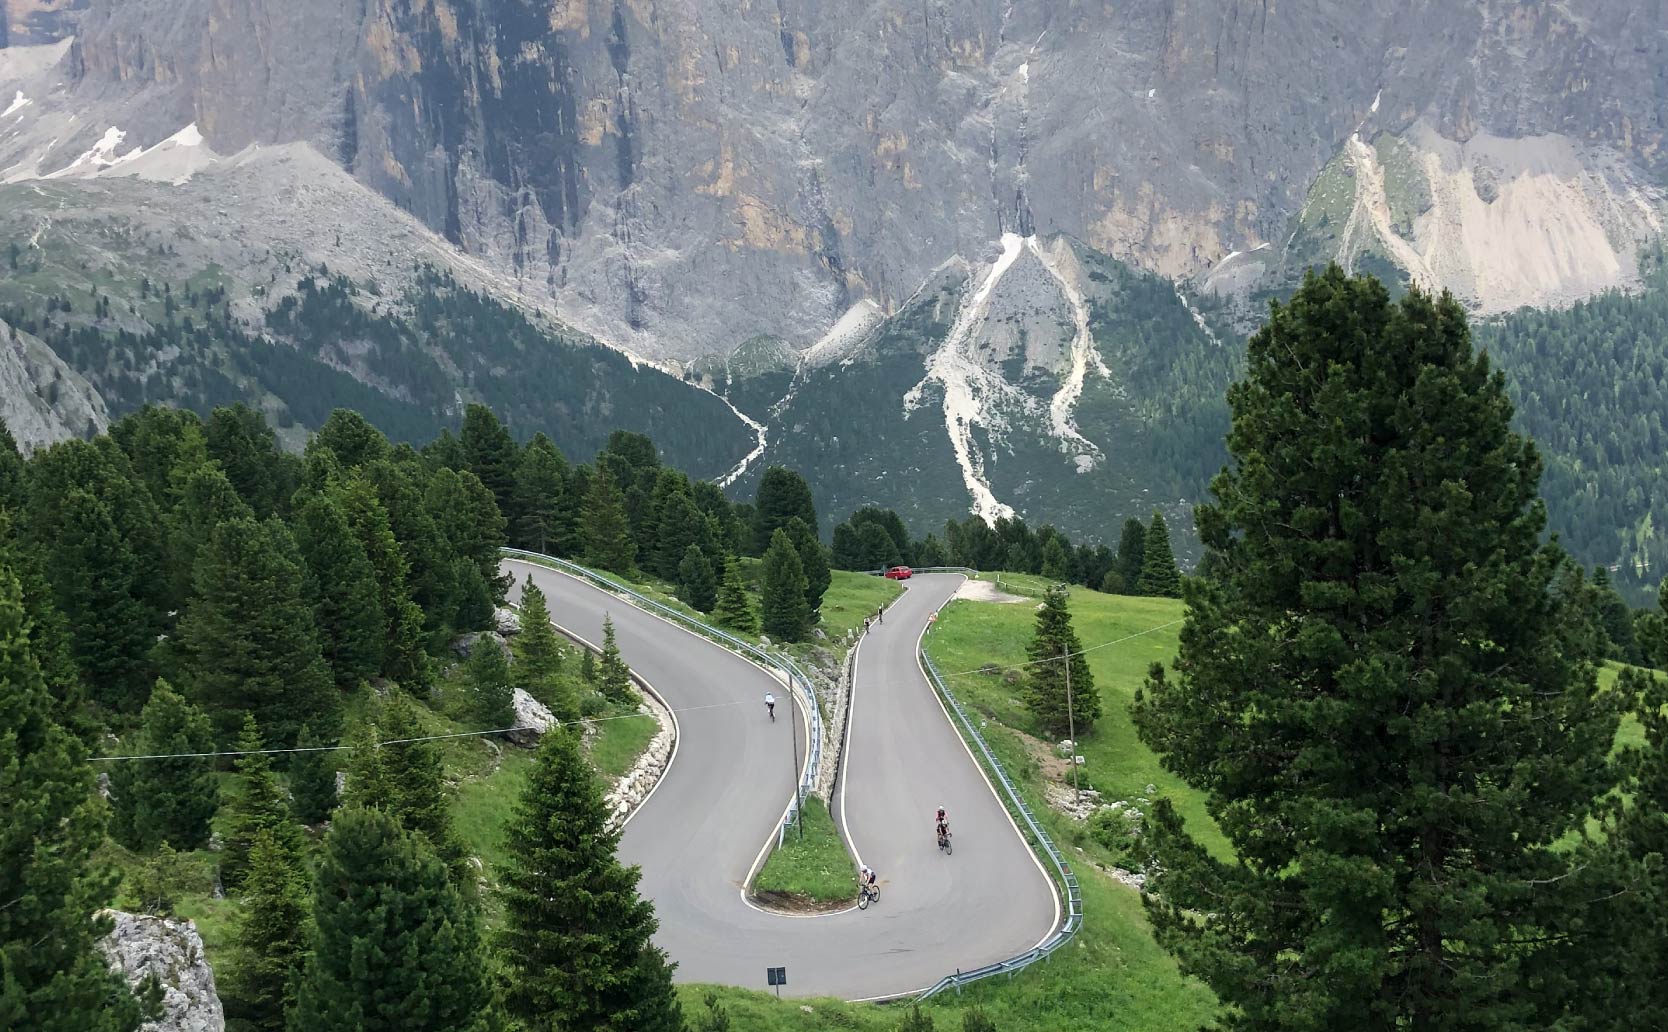 flyover view of people riding their bike on a paved road in the Dolomites